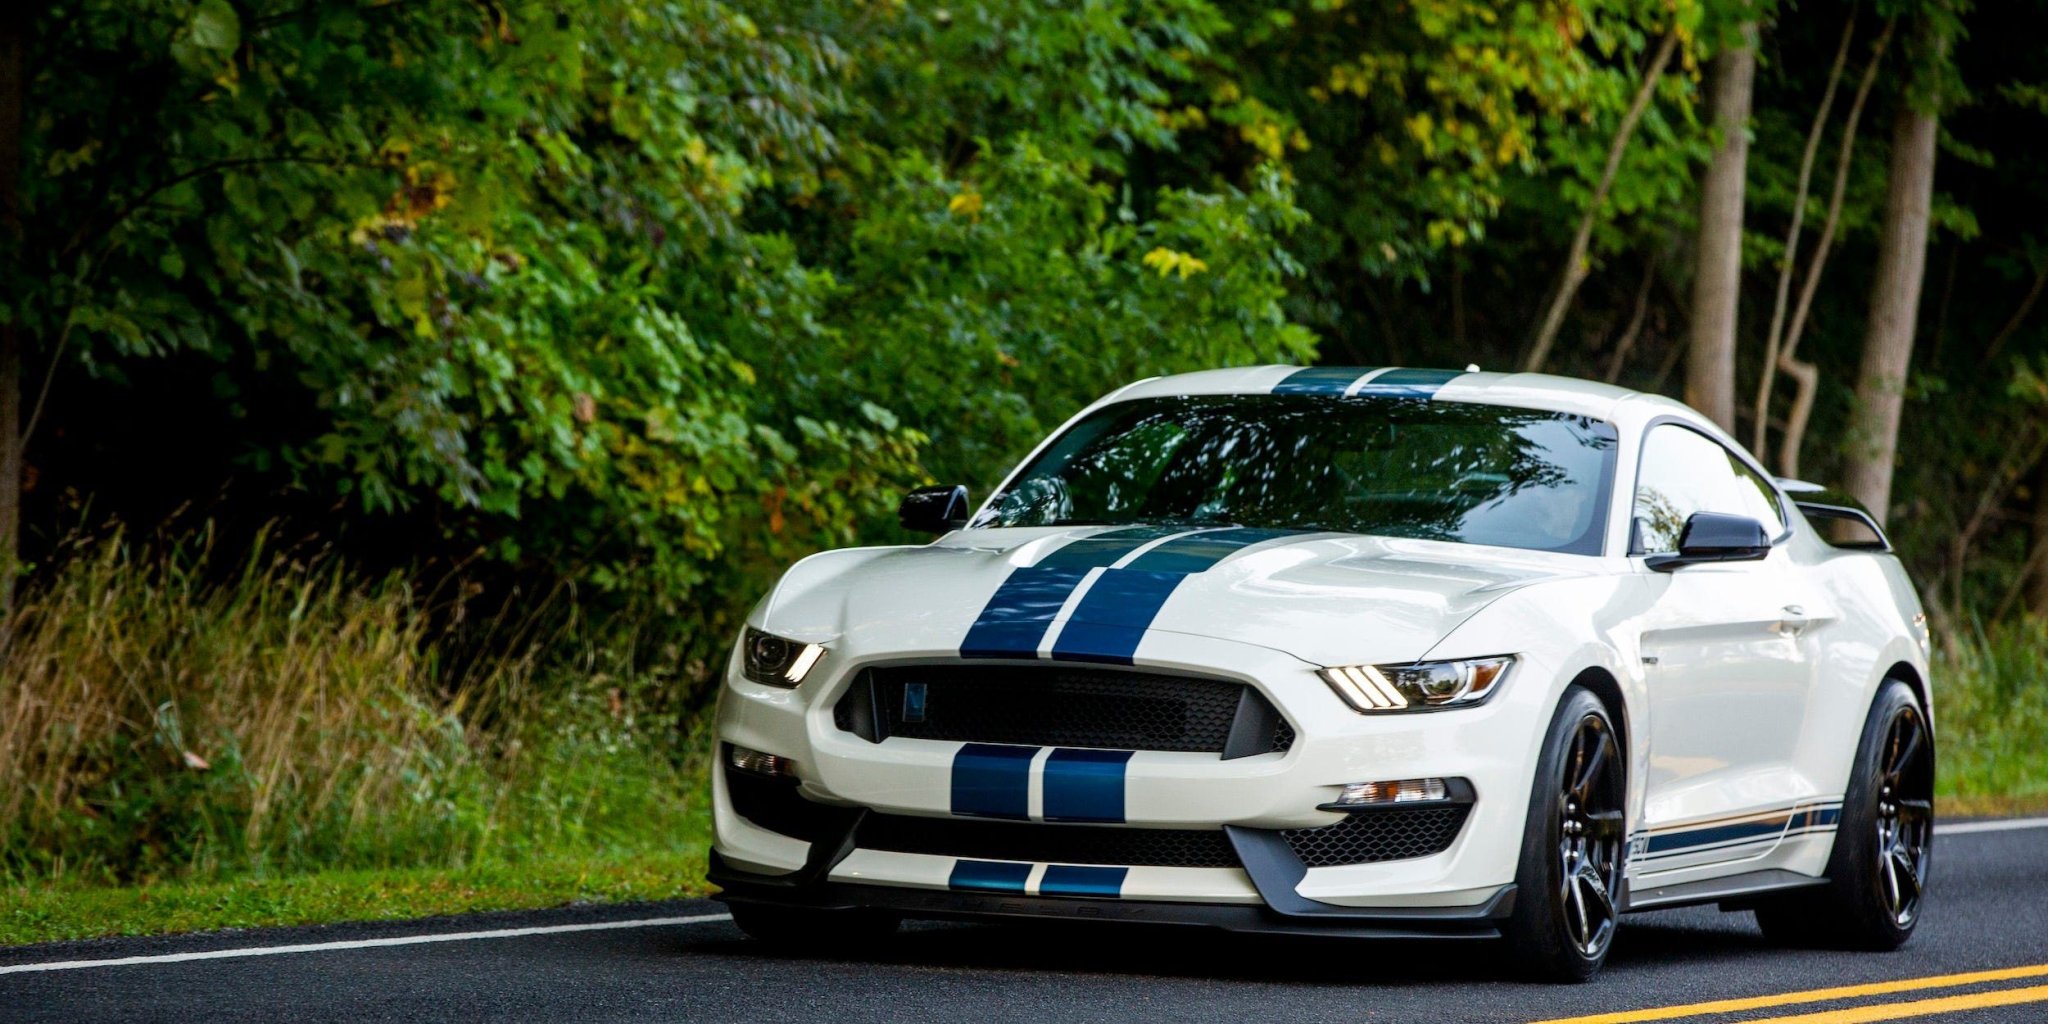 10 Captivating Facts About The Discontinued Ford Mustang Shelby GT350